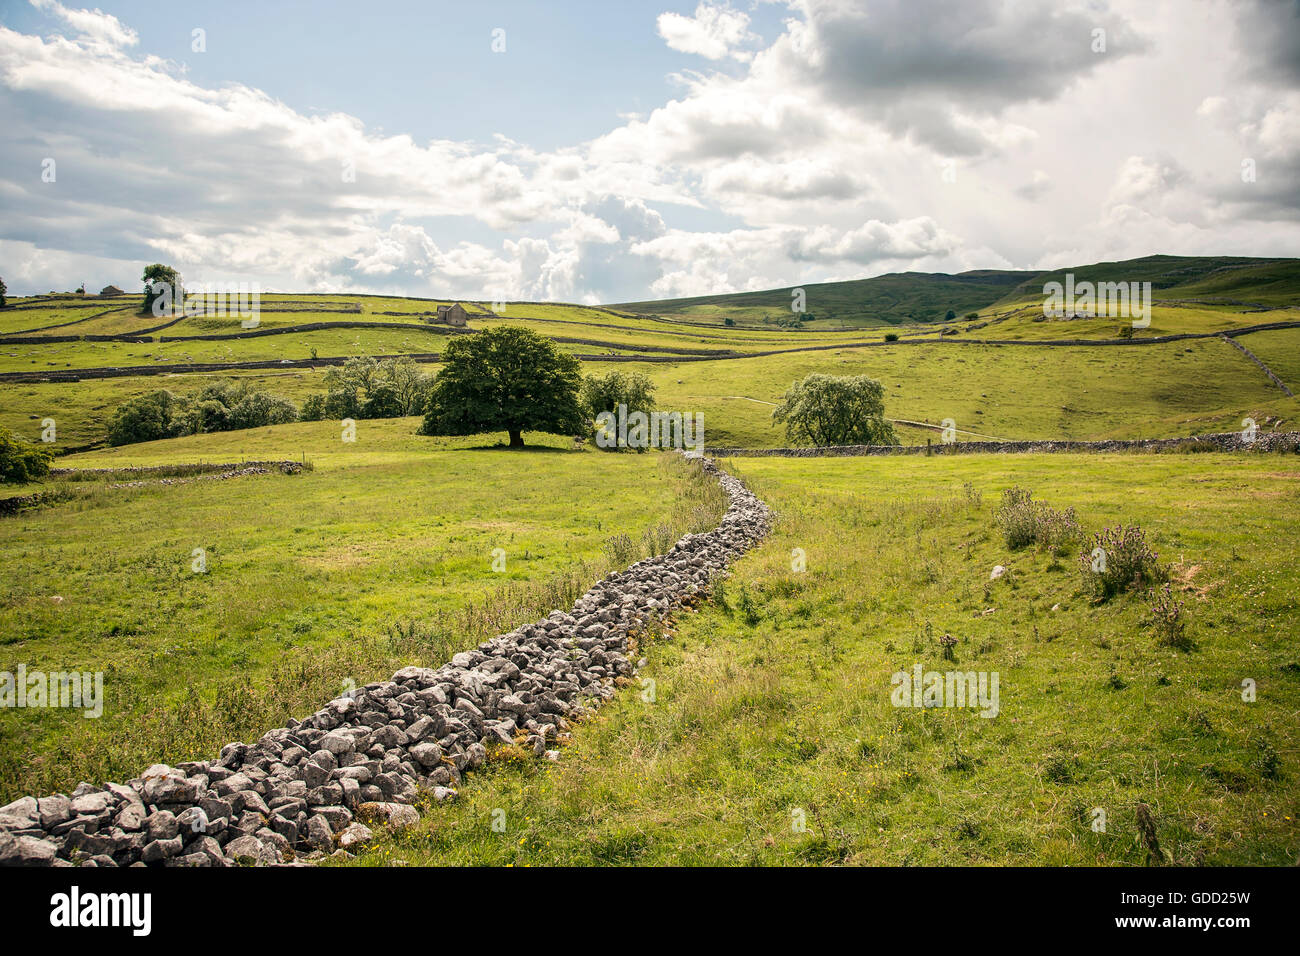 Crumbled rubble of Drystone Wall in Malham, Yorkshire Dales Stock Photo